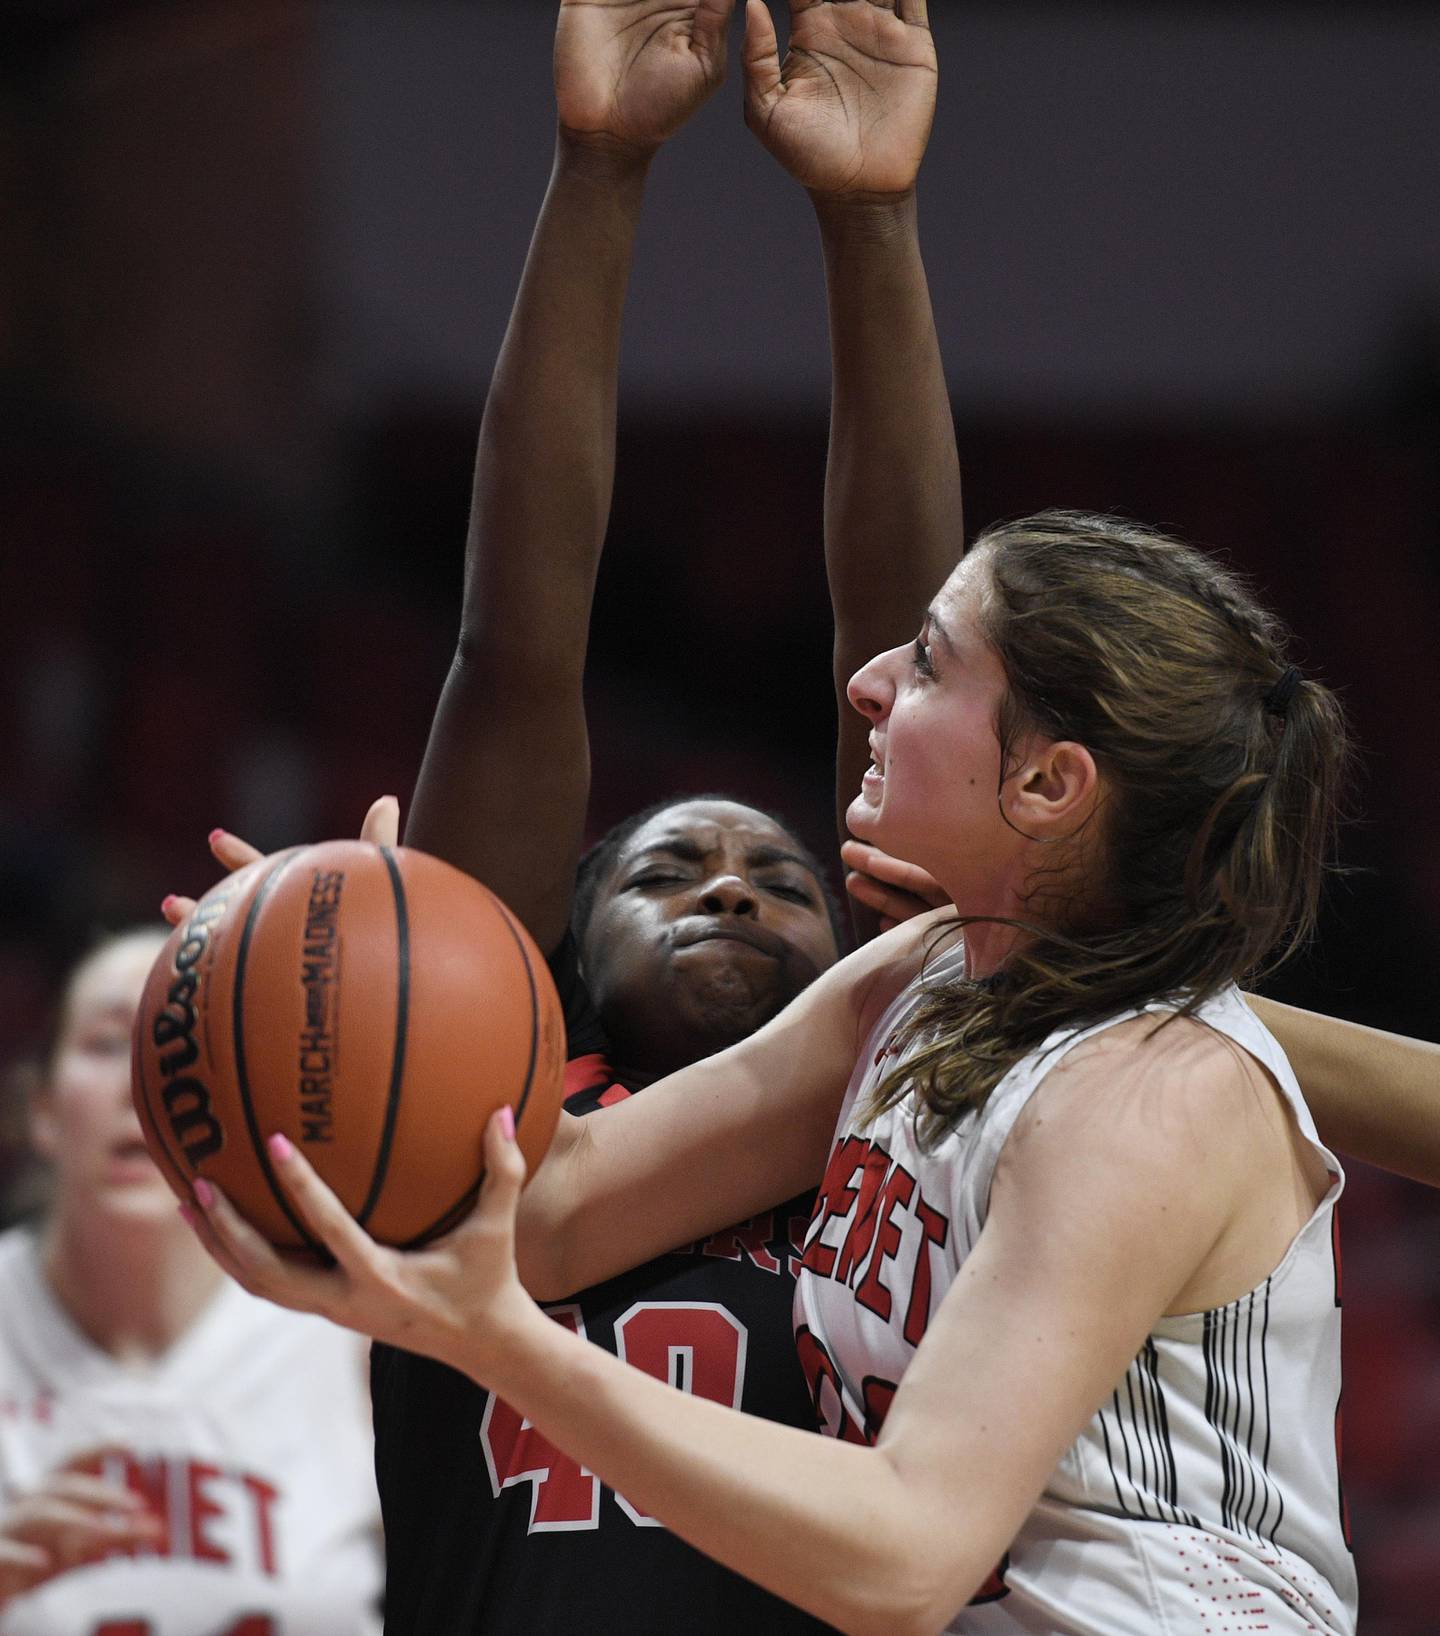 Benet Academy’s Olympia Kokkines looks for the hoop as Bolingbrook's Jasmine Jones defends in the Class 4A state 3rd place game at Redbird Arena at Illinois State University in Normal on Friday, March 4, 2022.